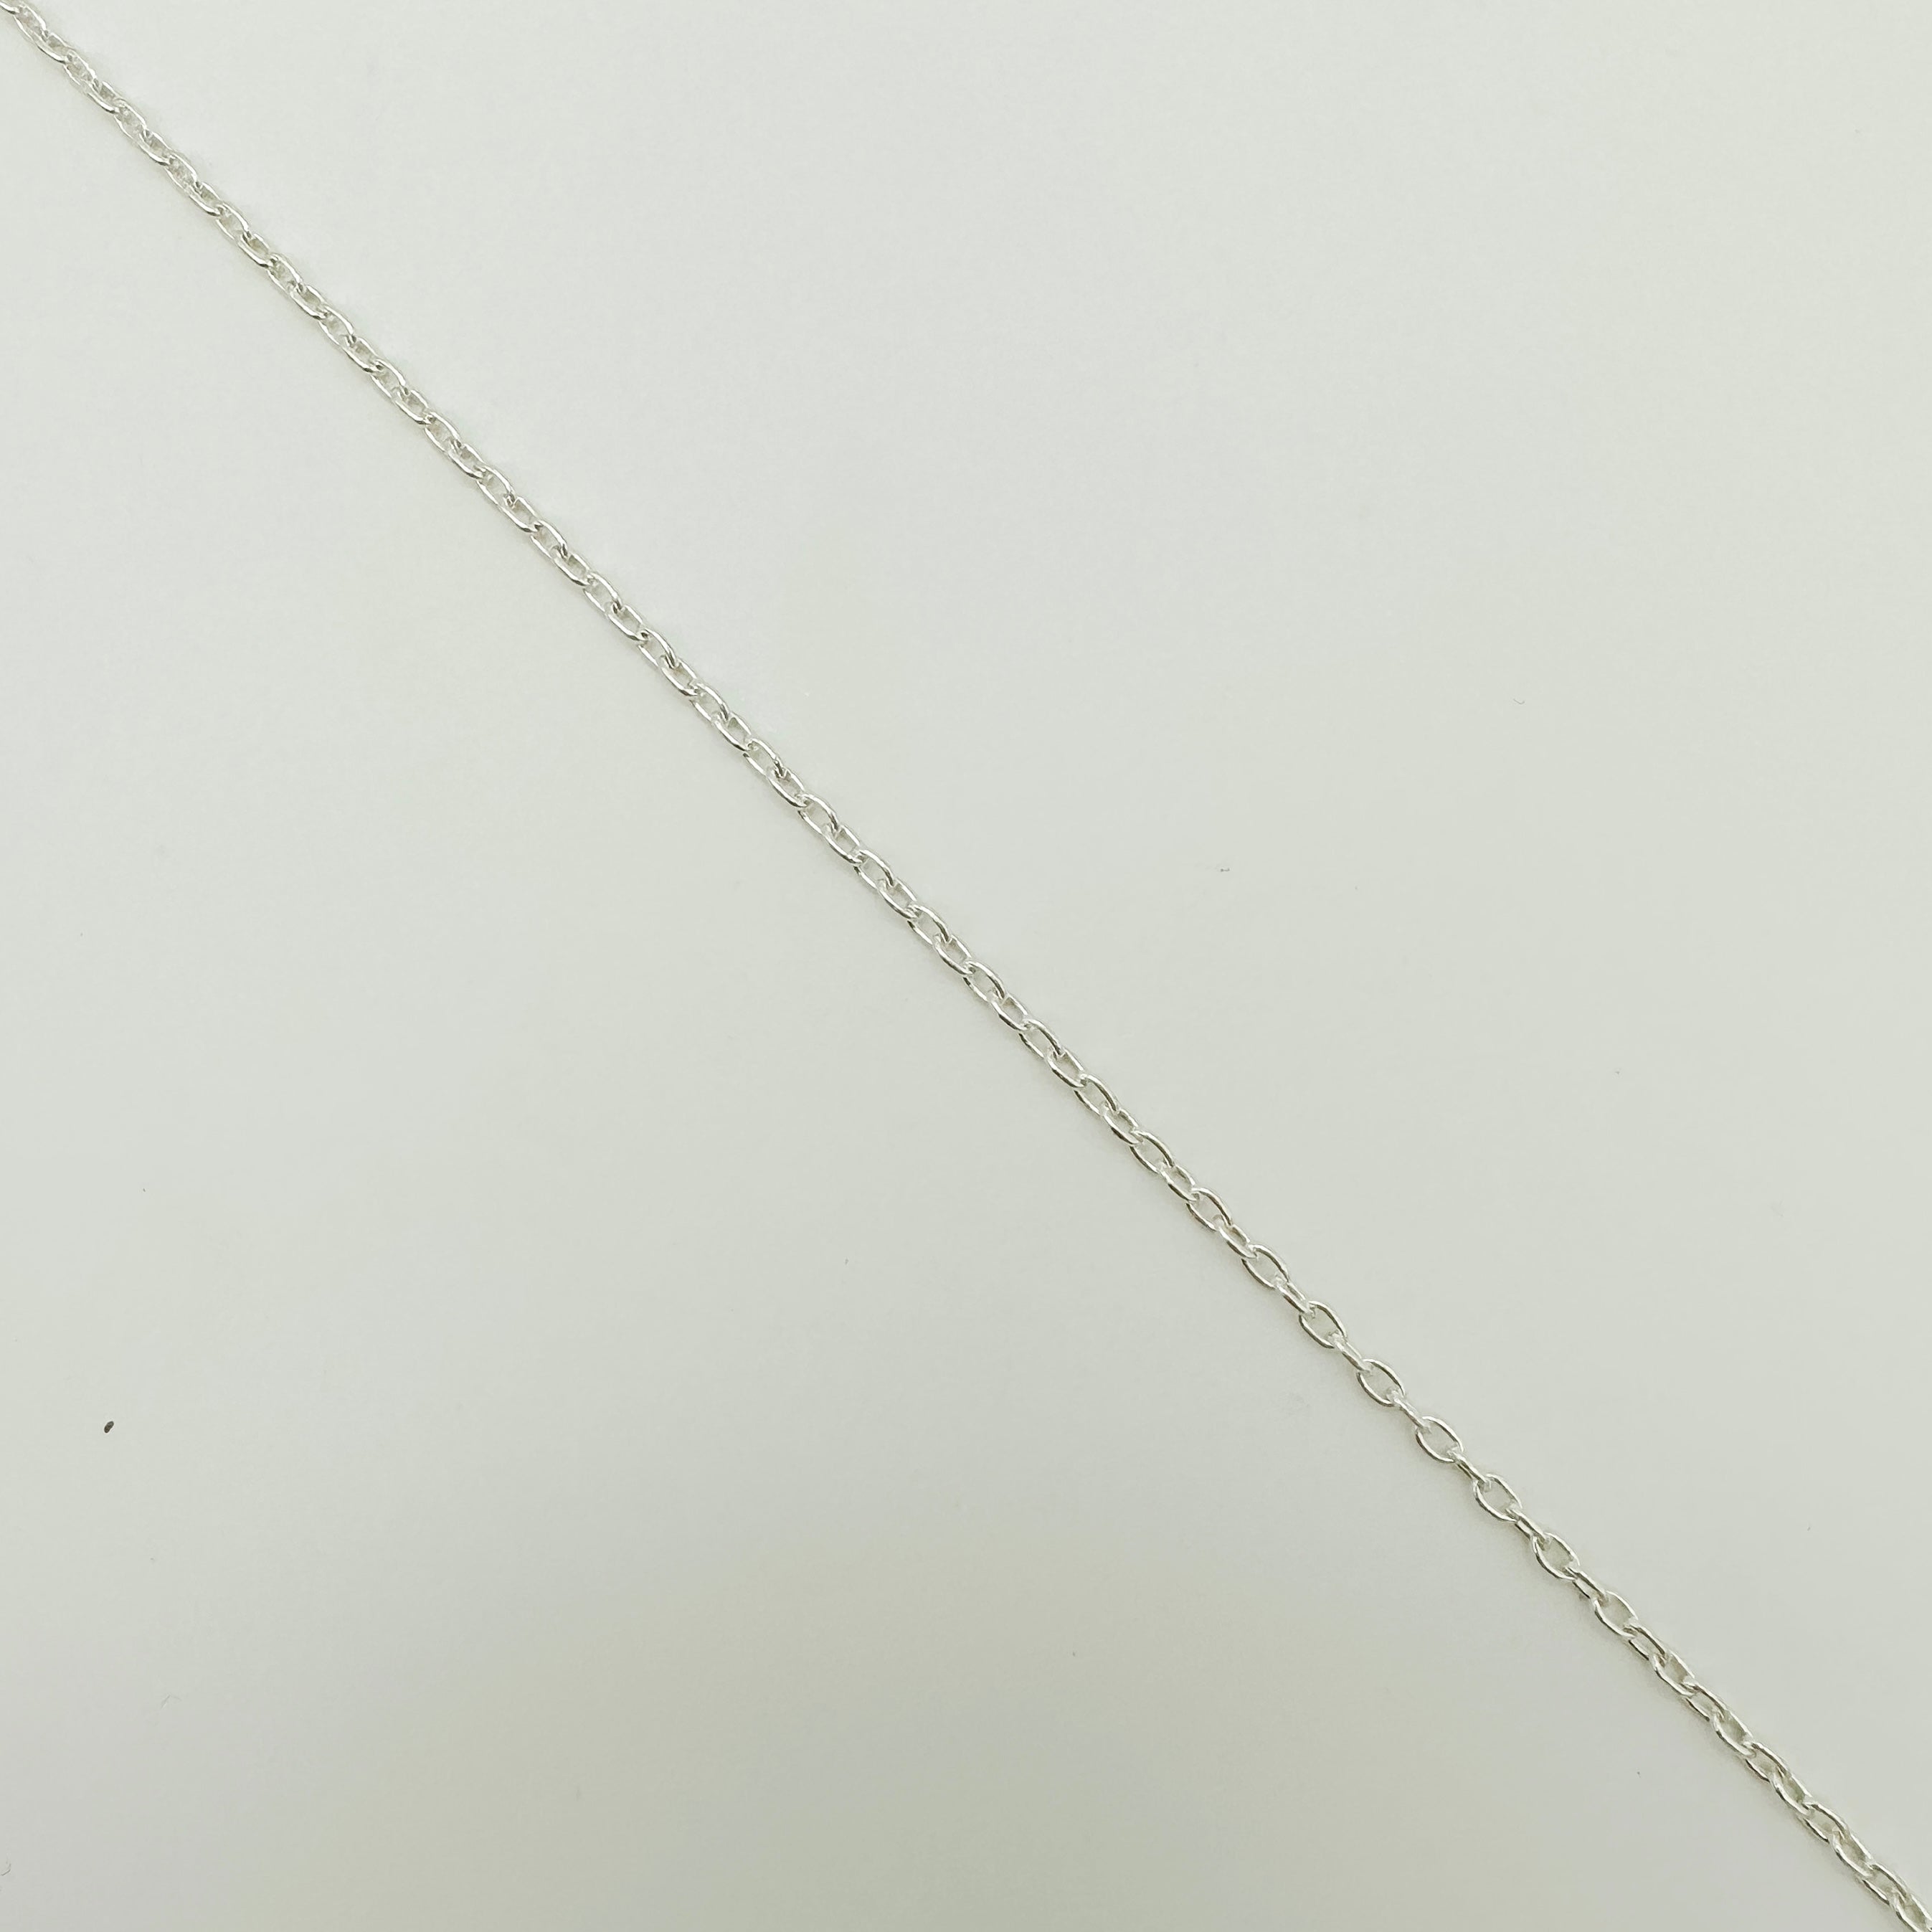 sterling silver paperclip chain / permanent jewelry supplies / wholesale chain by the foot / sterling silver chain